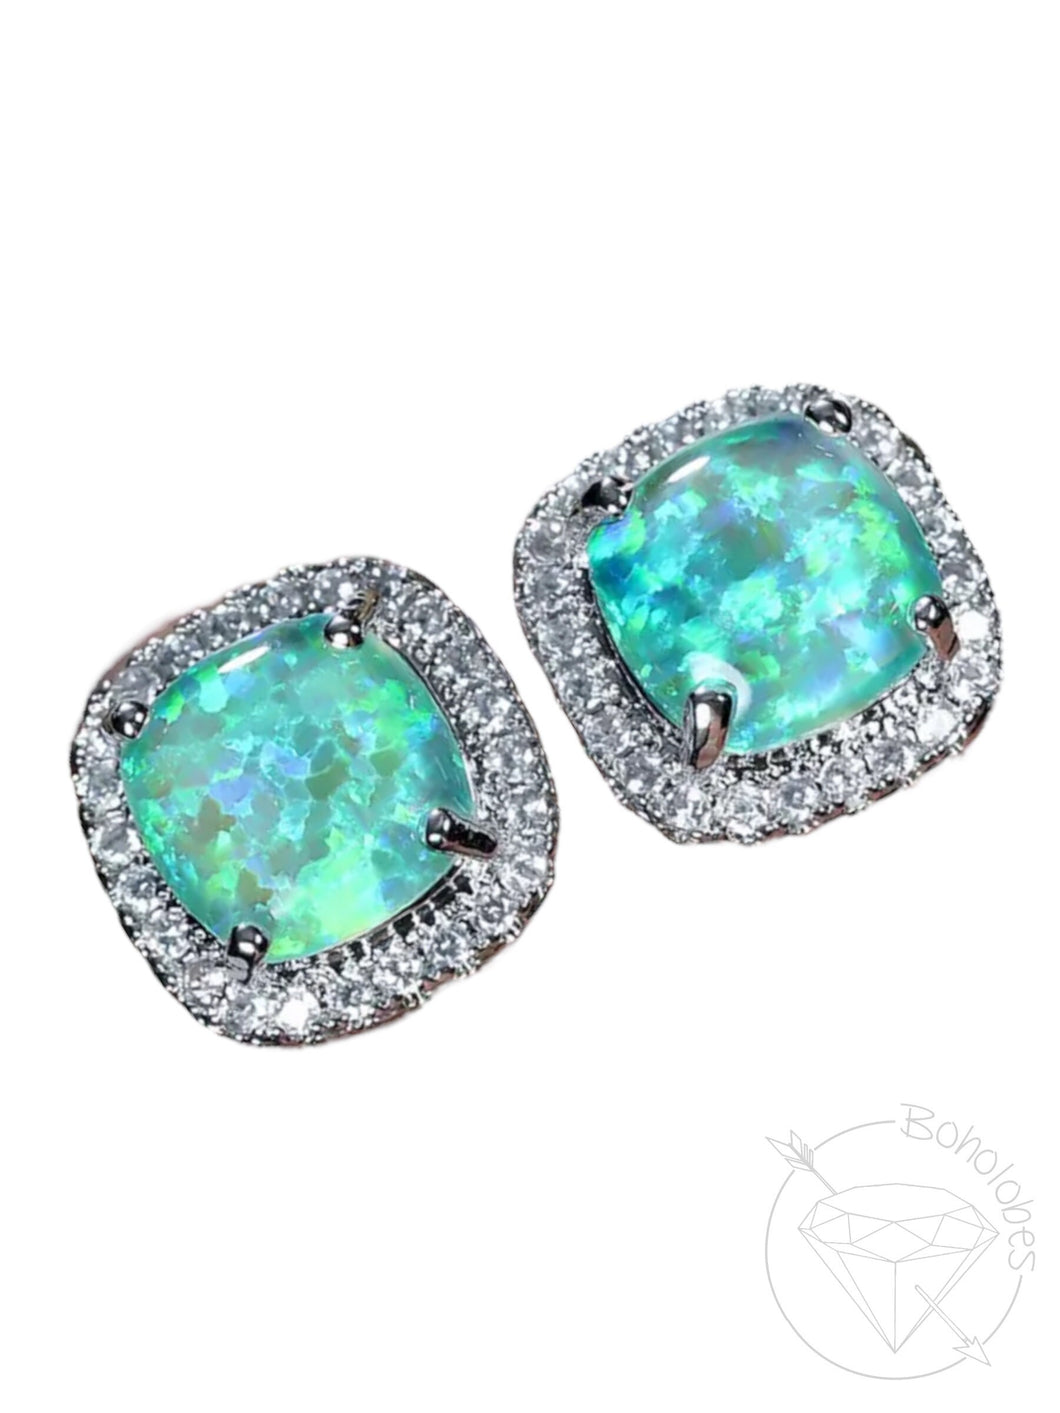 Crystal opal plugs Square CZ halo stud white gold silver wedding plugs for gauged or stretched ears: Sizes 12g 10g 8g 6g 4g 2g 1g 0g